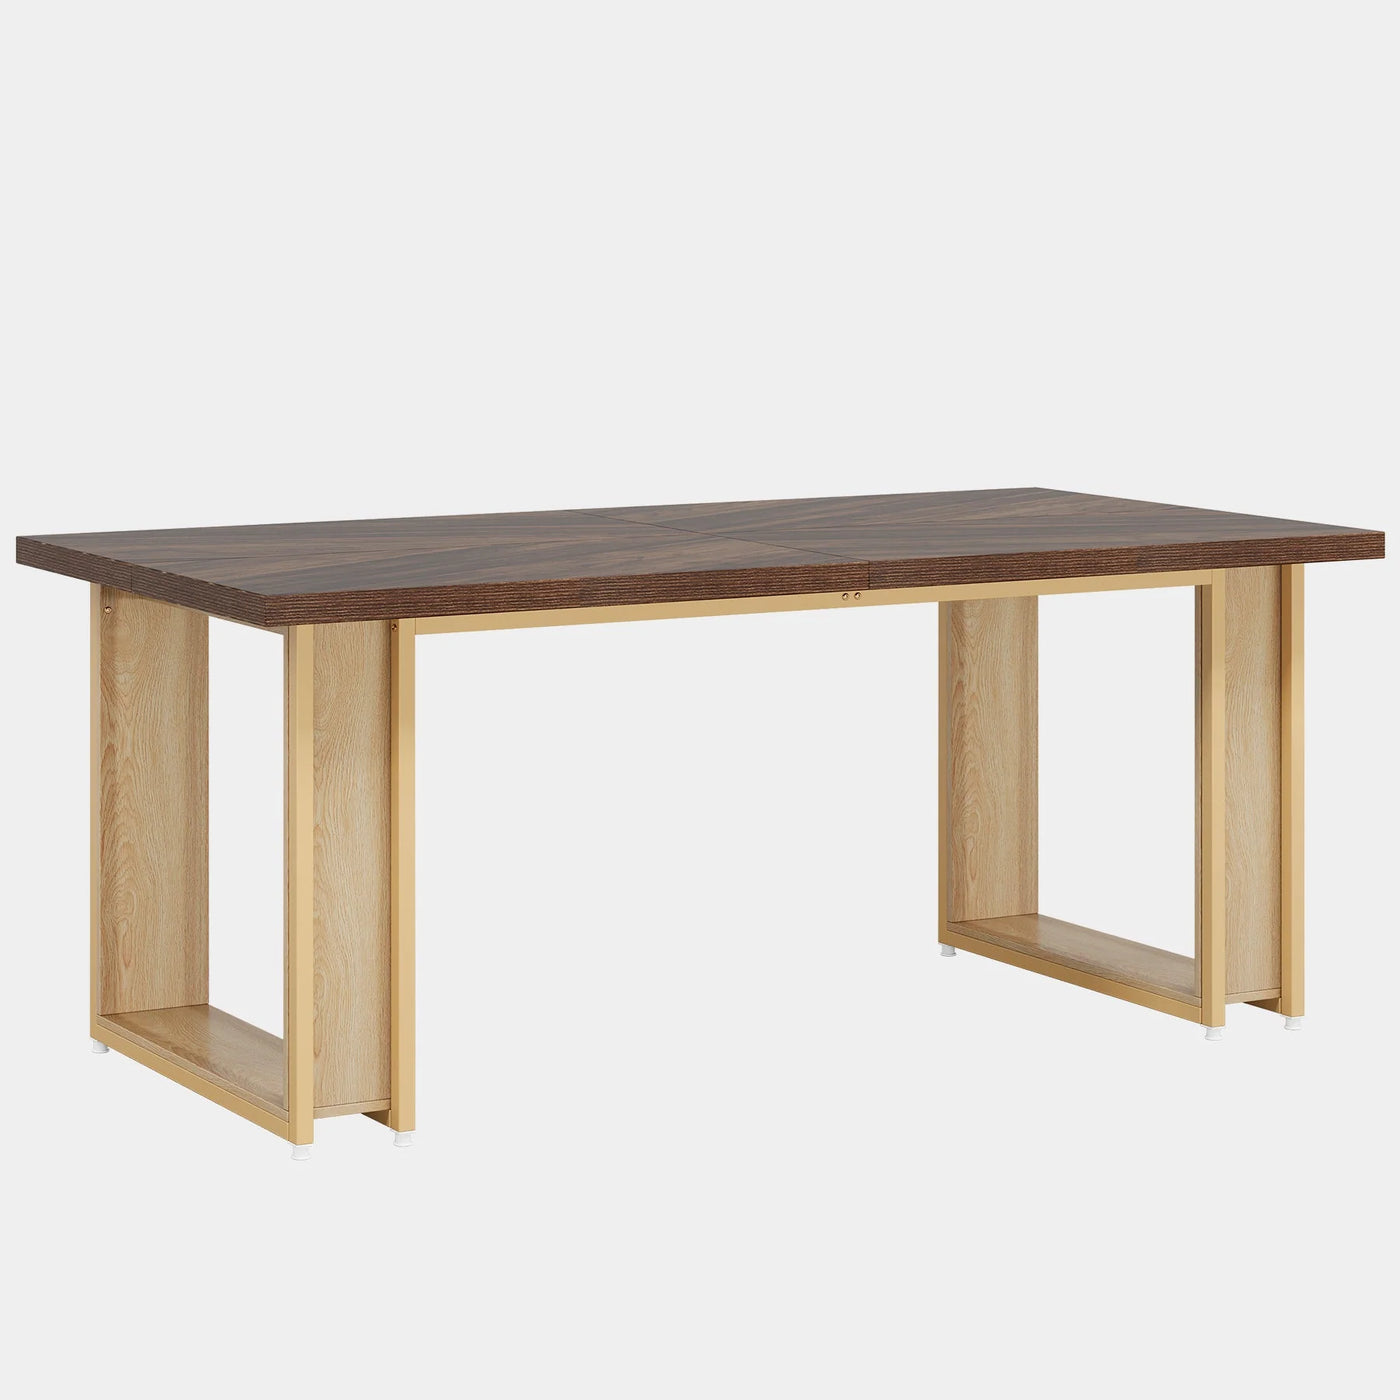 Hewitt 63-Inch Dining Table for 4-6 | Rectangular Wood Kitchen Table for Dining Room